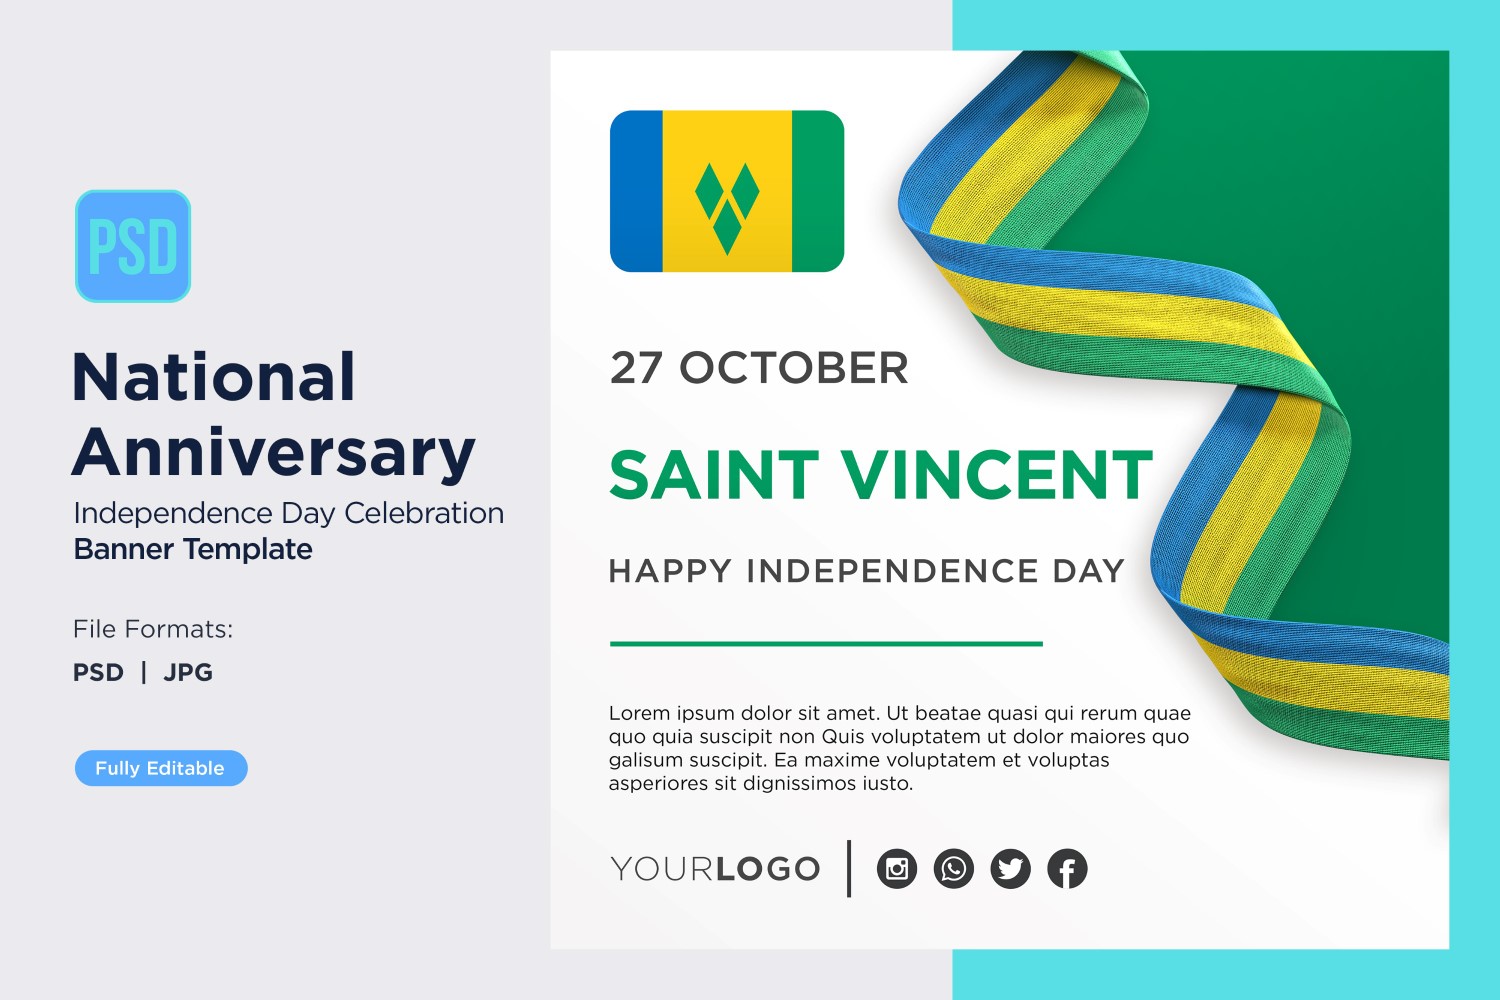 Saint Vincent and the Grenadine National Day Banner